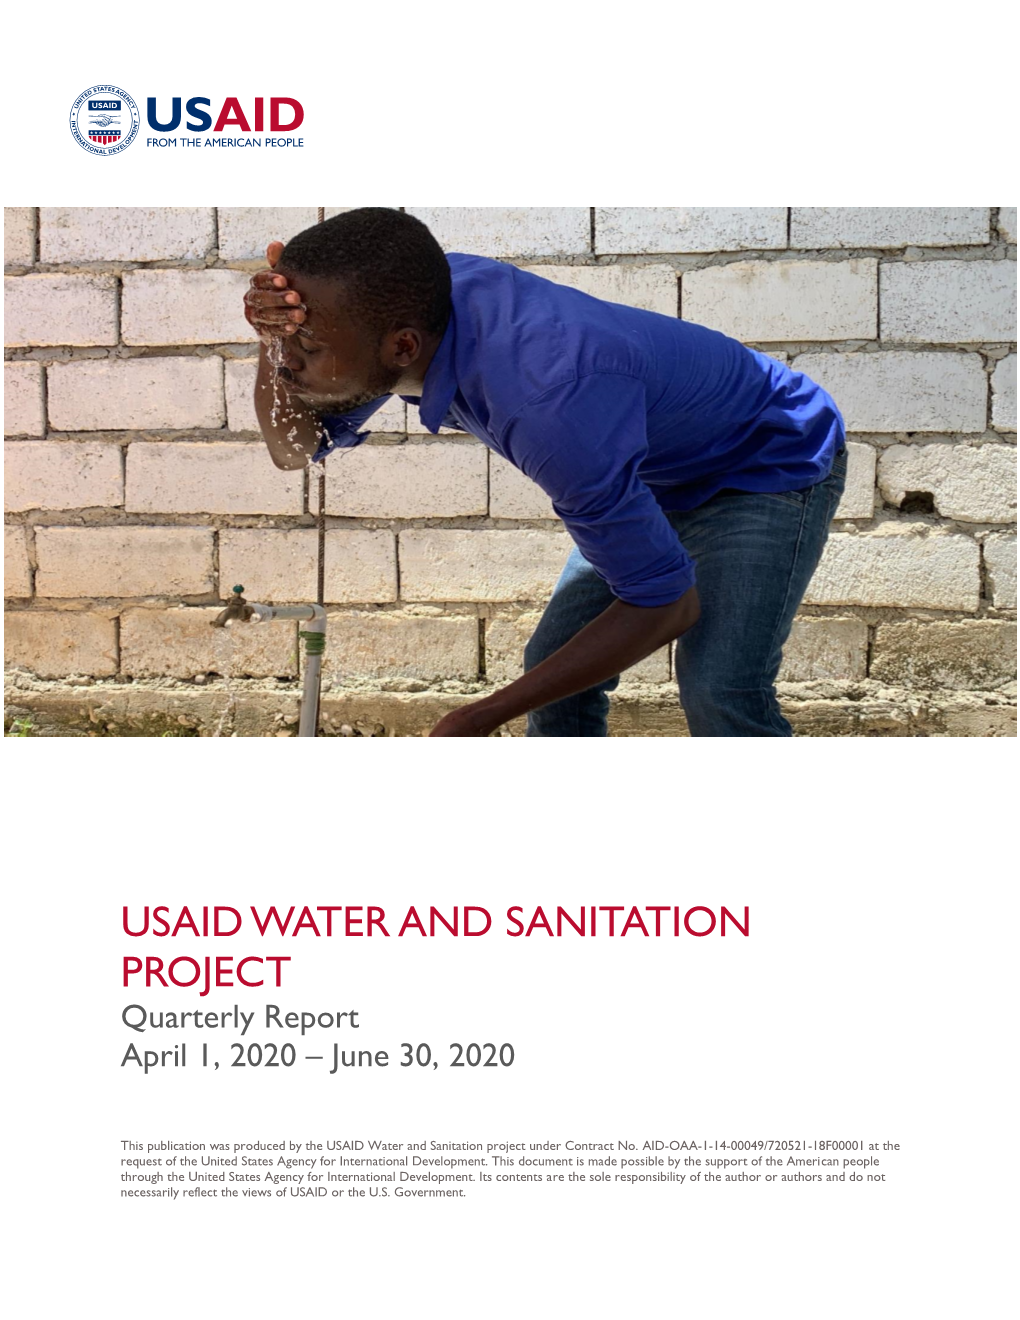 USAID WATER and SANITATION PROJECT Quarterly Report April 1, 2020 – June 30, 2020